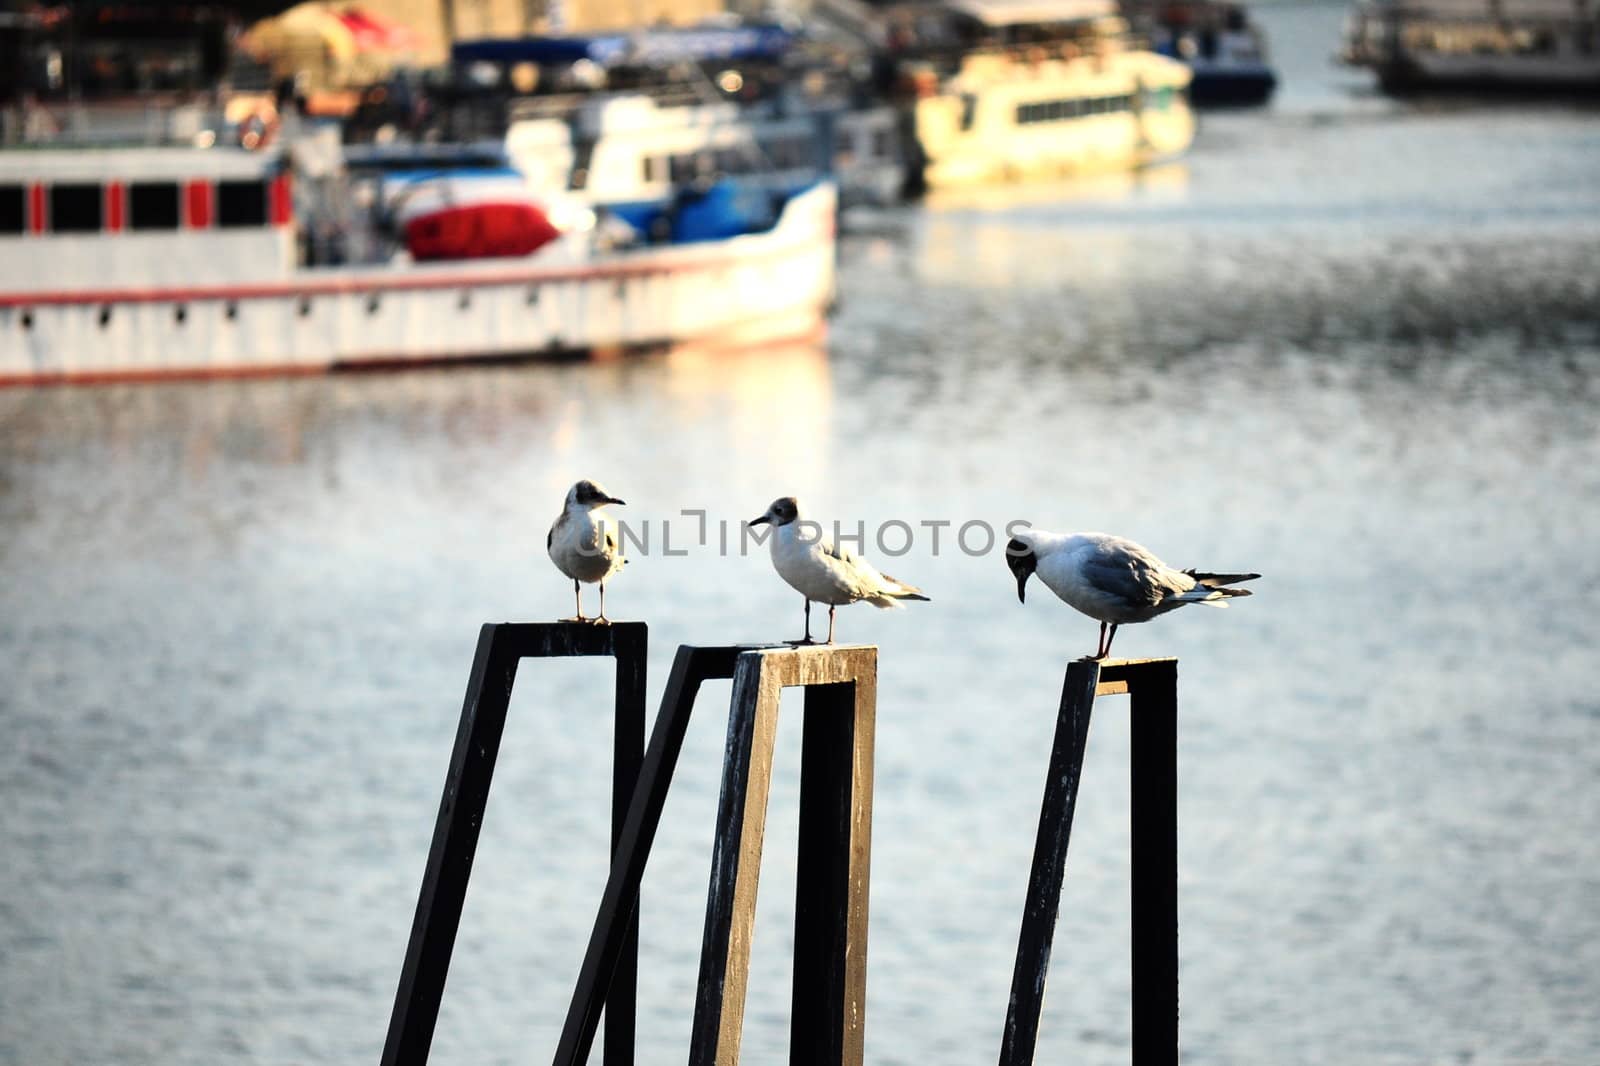 Three seagulls sitting on the handrails with river transport on the background